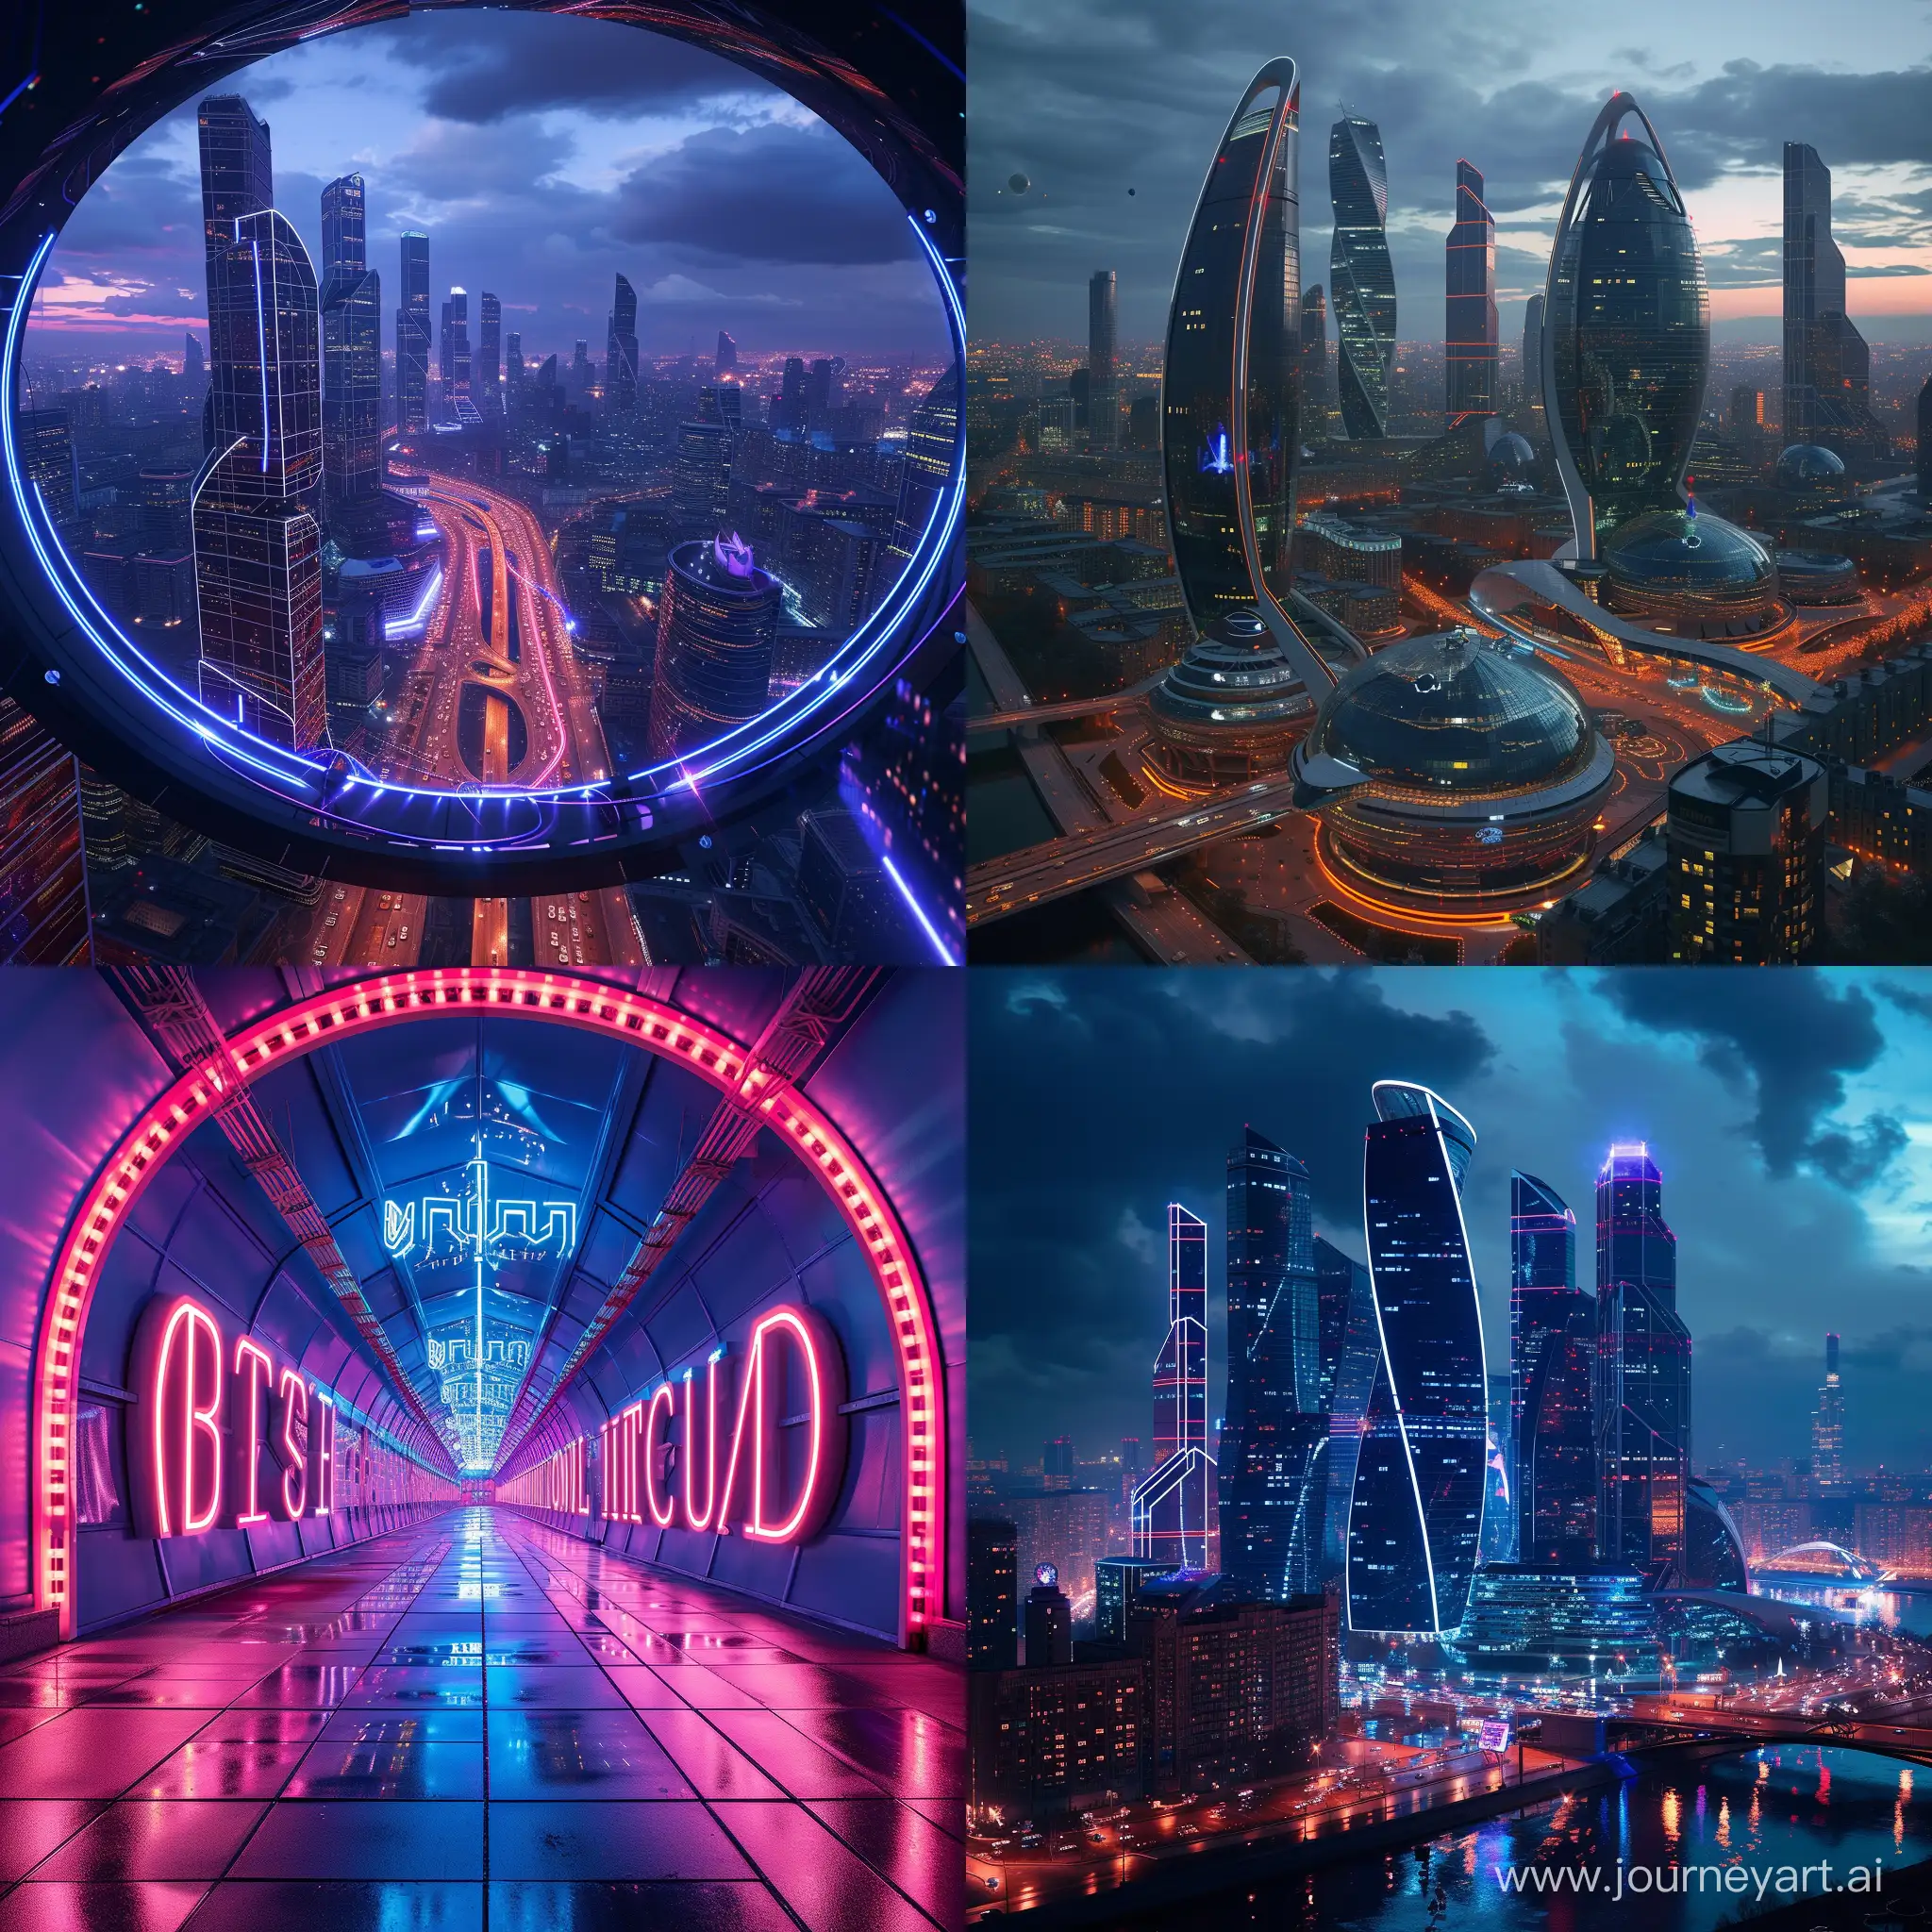 Futuristic-Moscow-Cityscape-with-Smart-Lighting-Cinematic-Style-Image